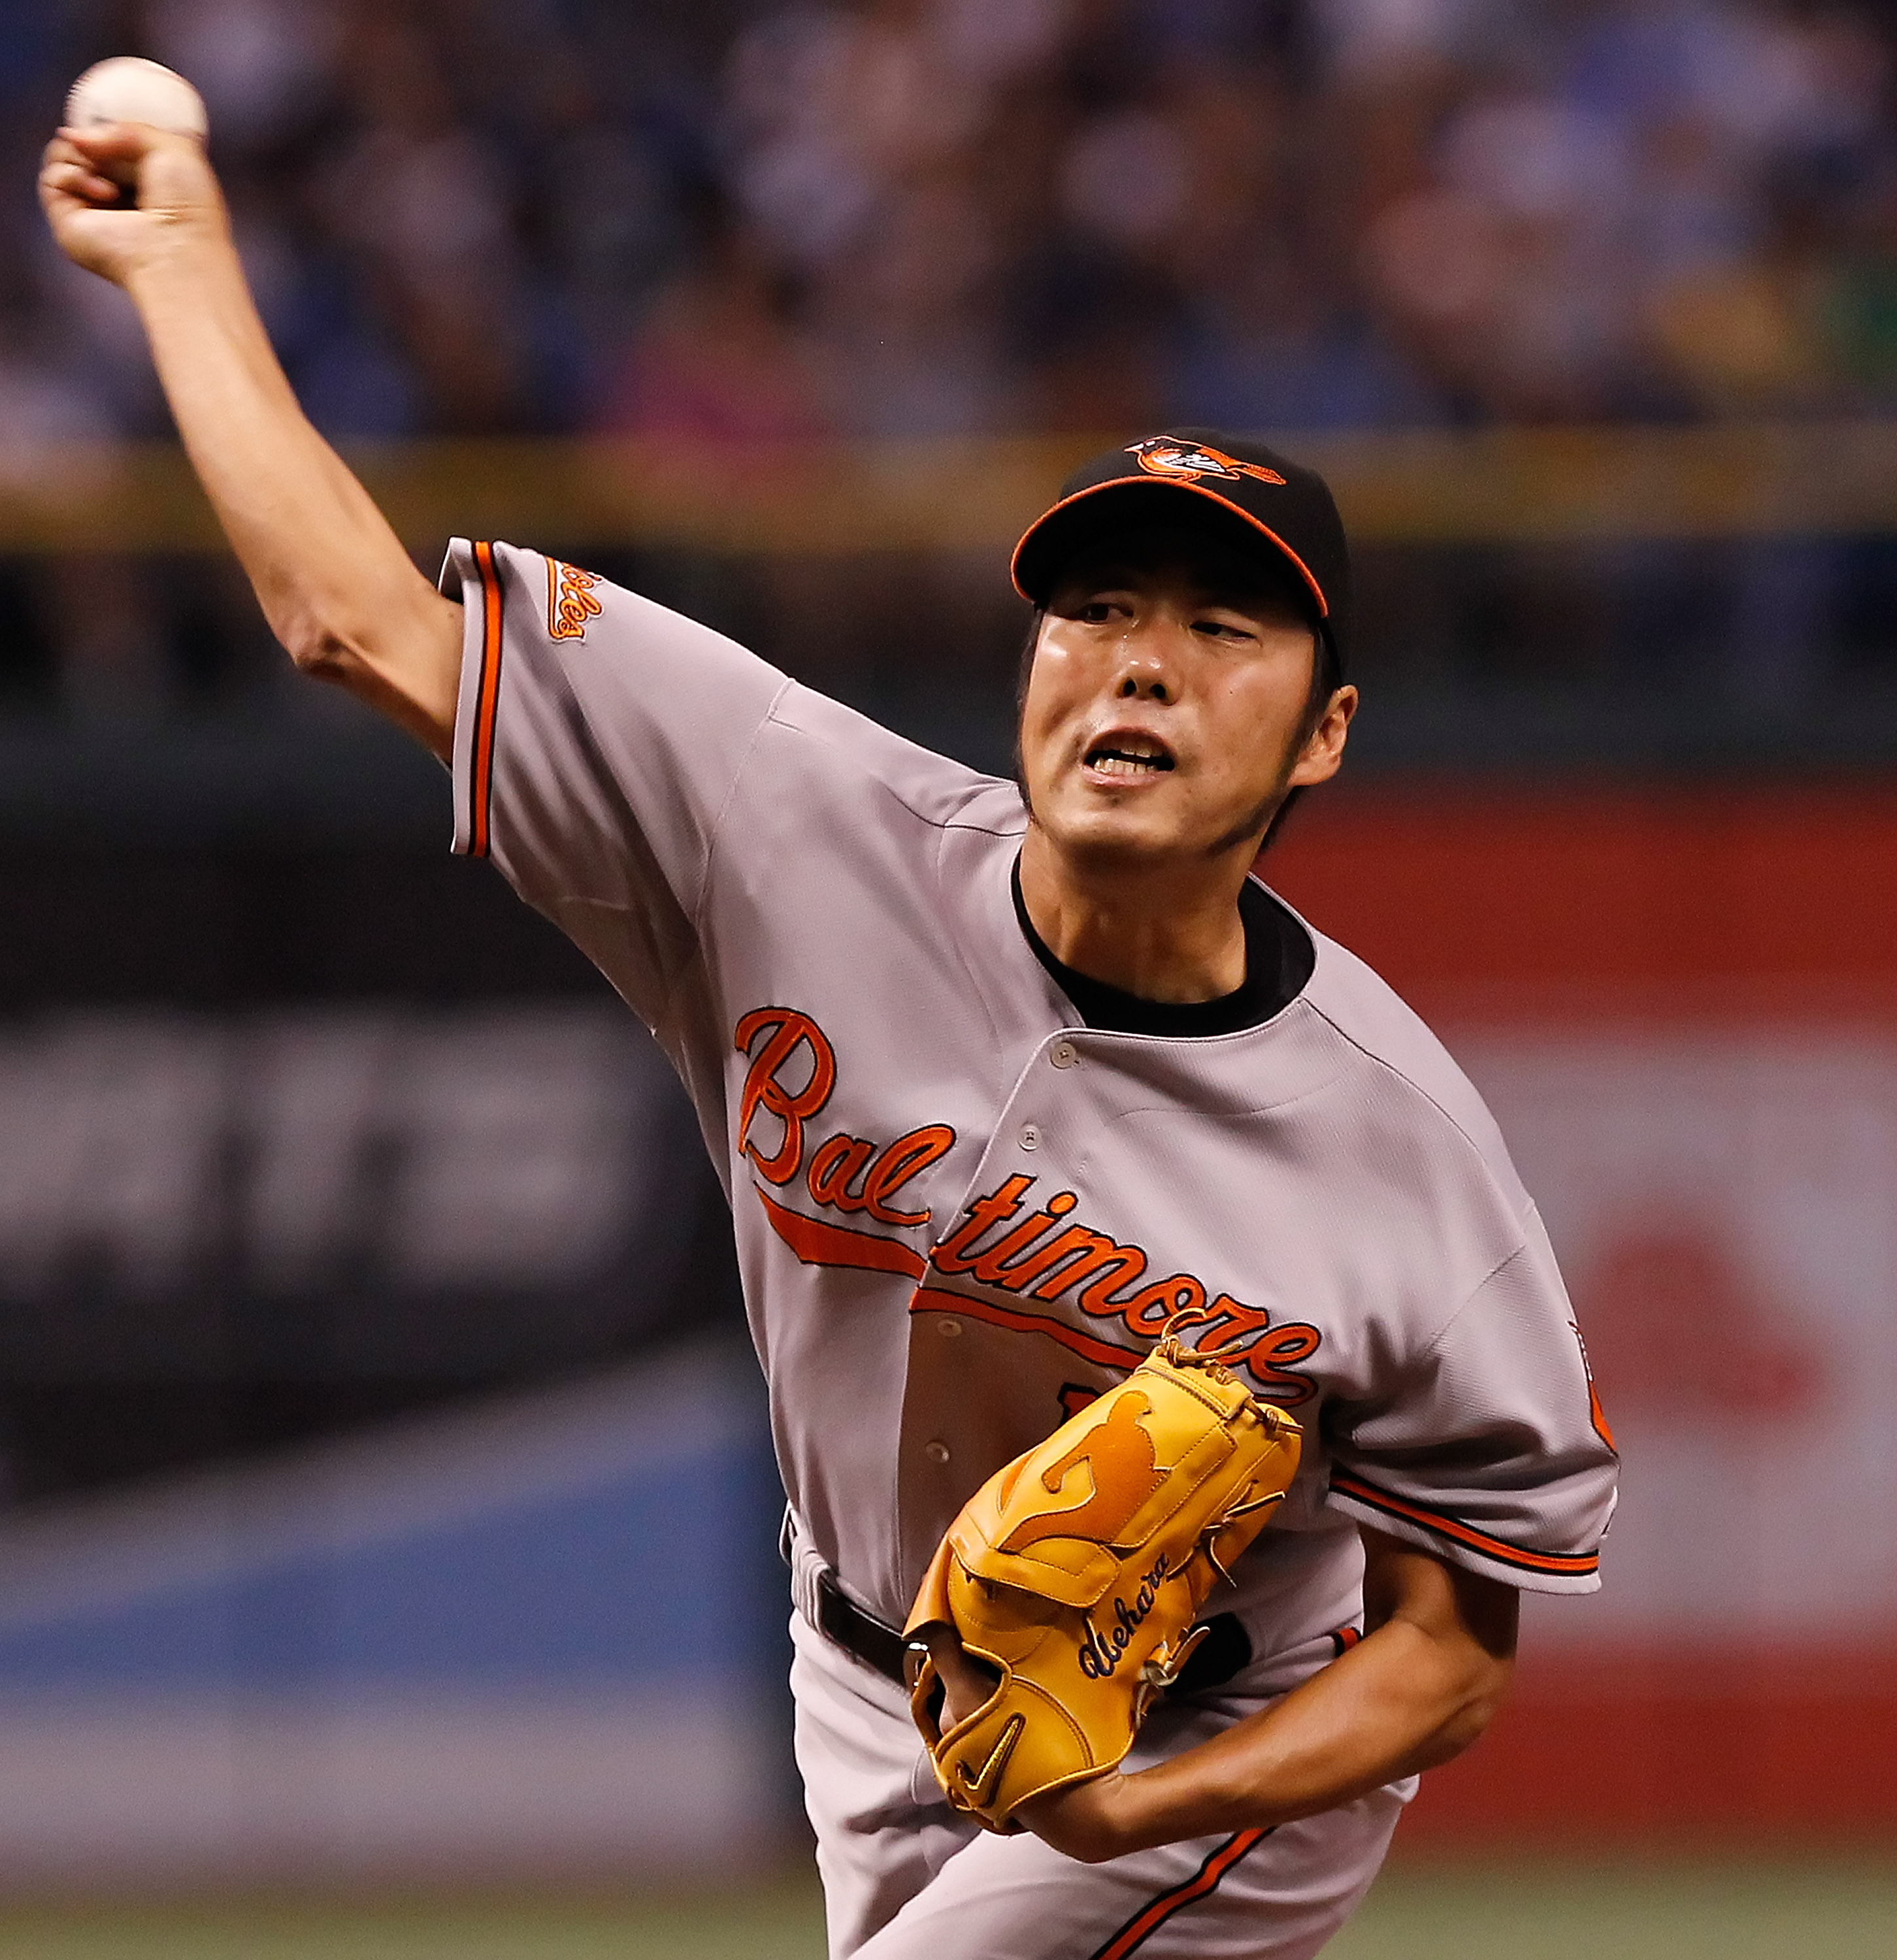 ST. PETERSBURG, FL - SEPTEMBER 29:  Relief pitcher Koji Uehara #19 of the Baltimore Orioles pitches against the Tampa Bay Rays at Tropicana Field on September 29, 2010 in St. Petersburg, Florida.  (Photo by J. Meric/Getty Images)